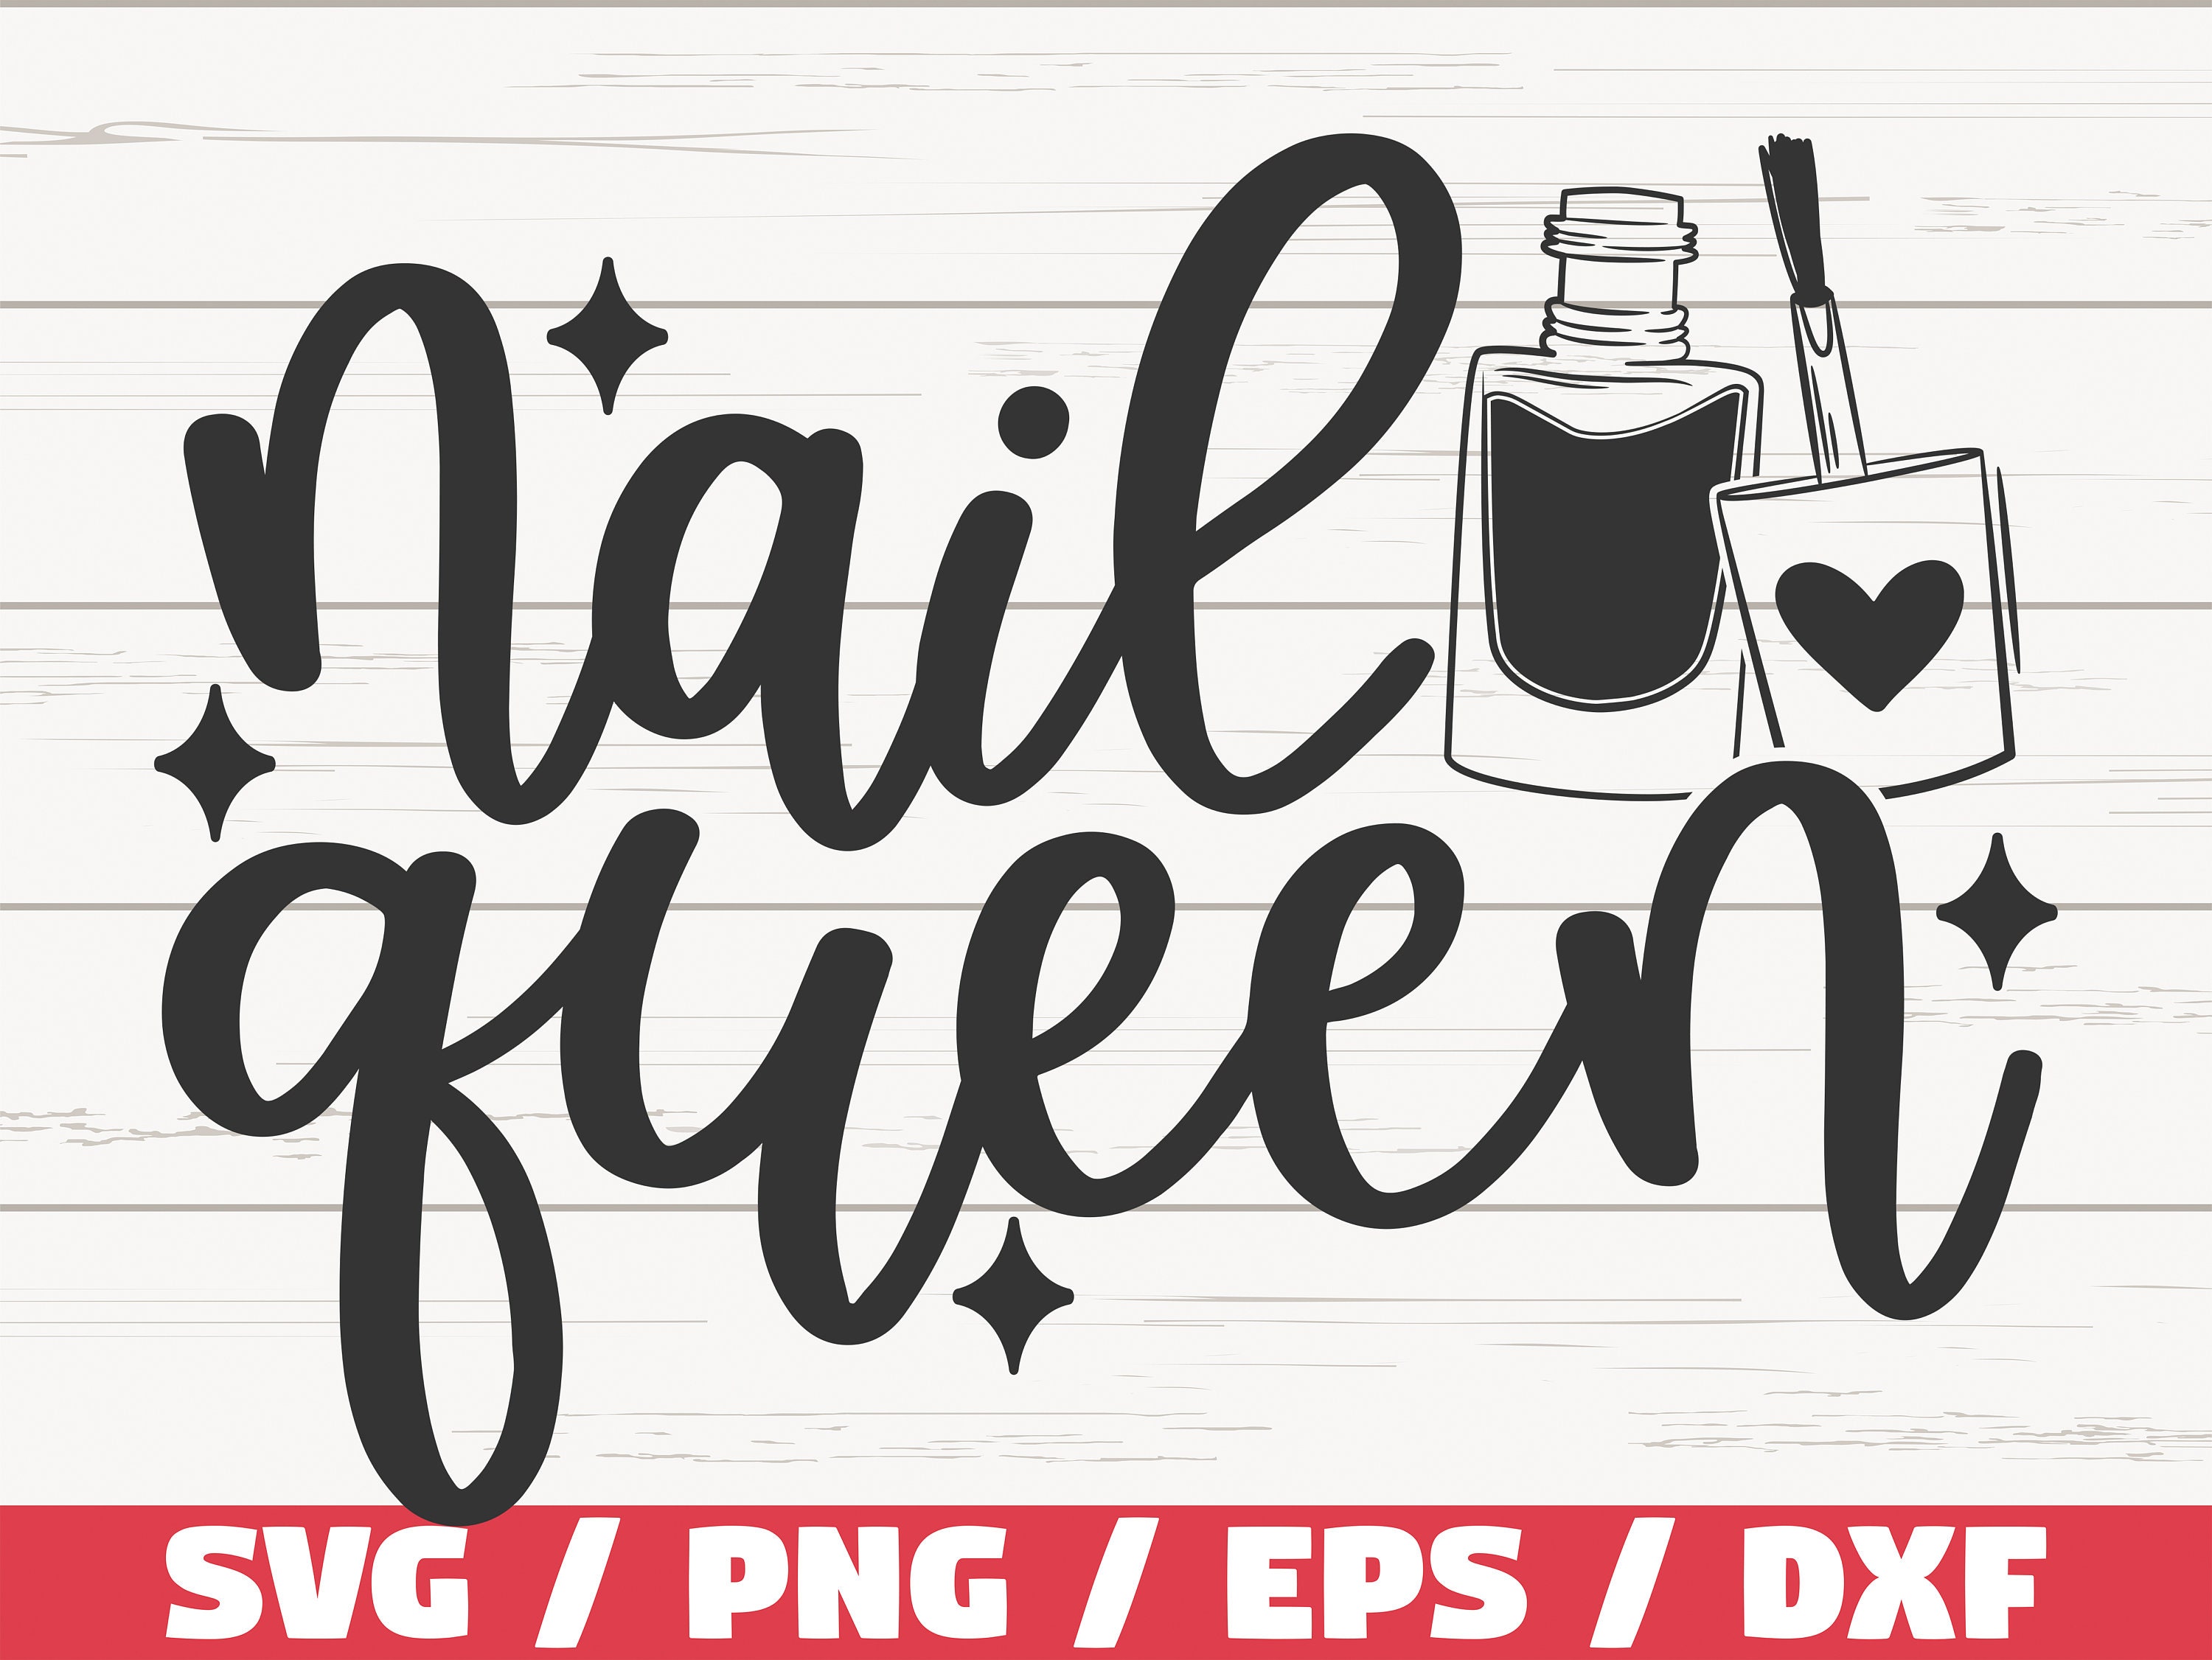 Nail Tip Guides, Nail Stencils Silhouette, SVG & Dxf Cutting Files for  Cricut and Silhouette Machines Includes Eps / Vector Instant Download 